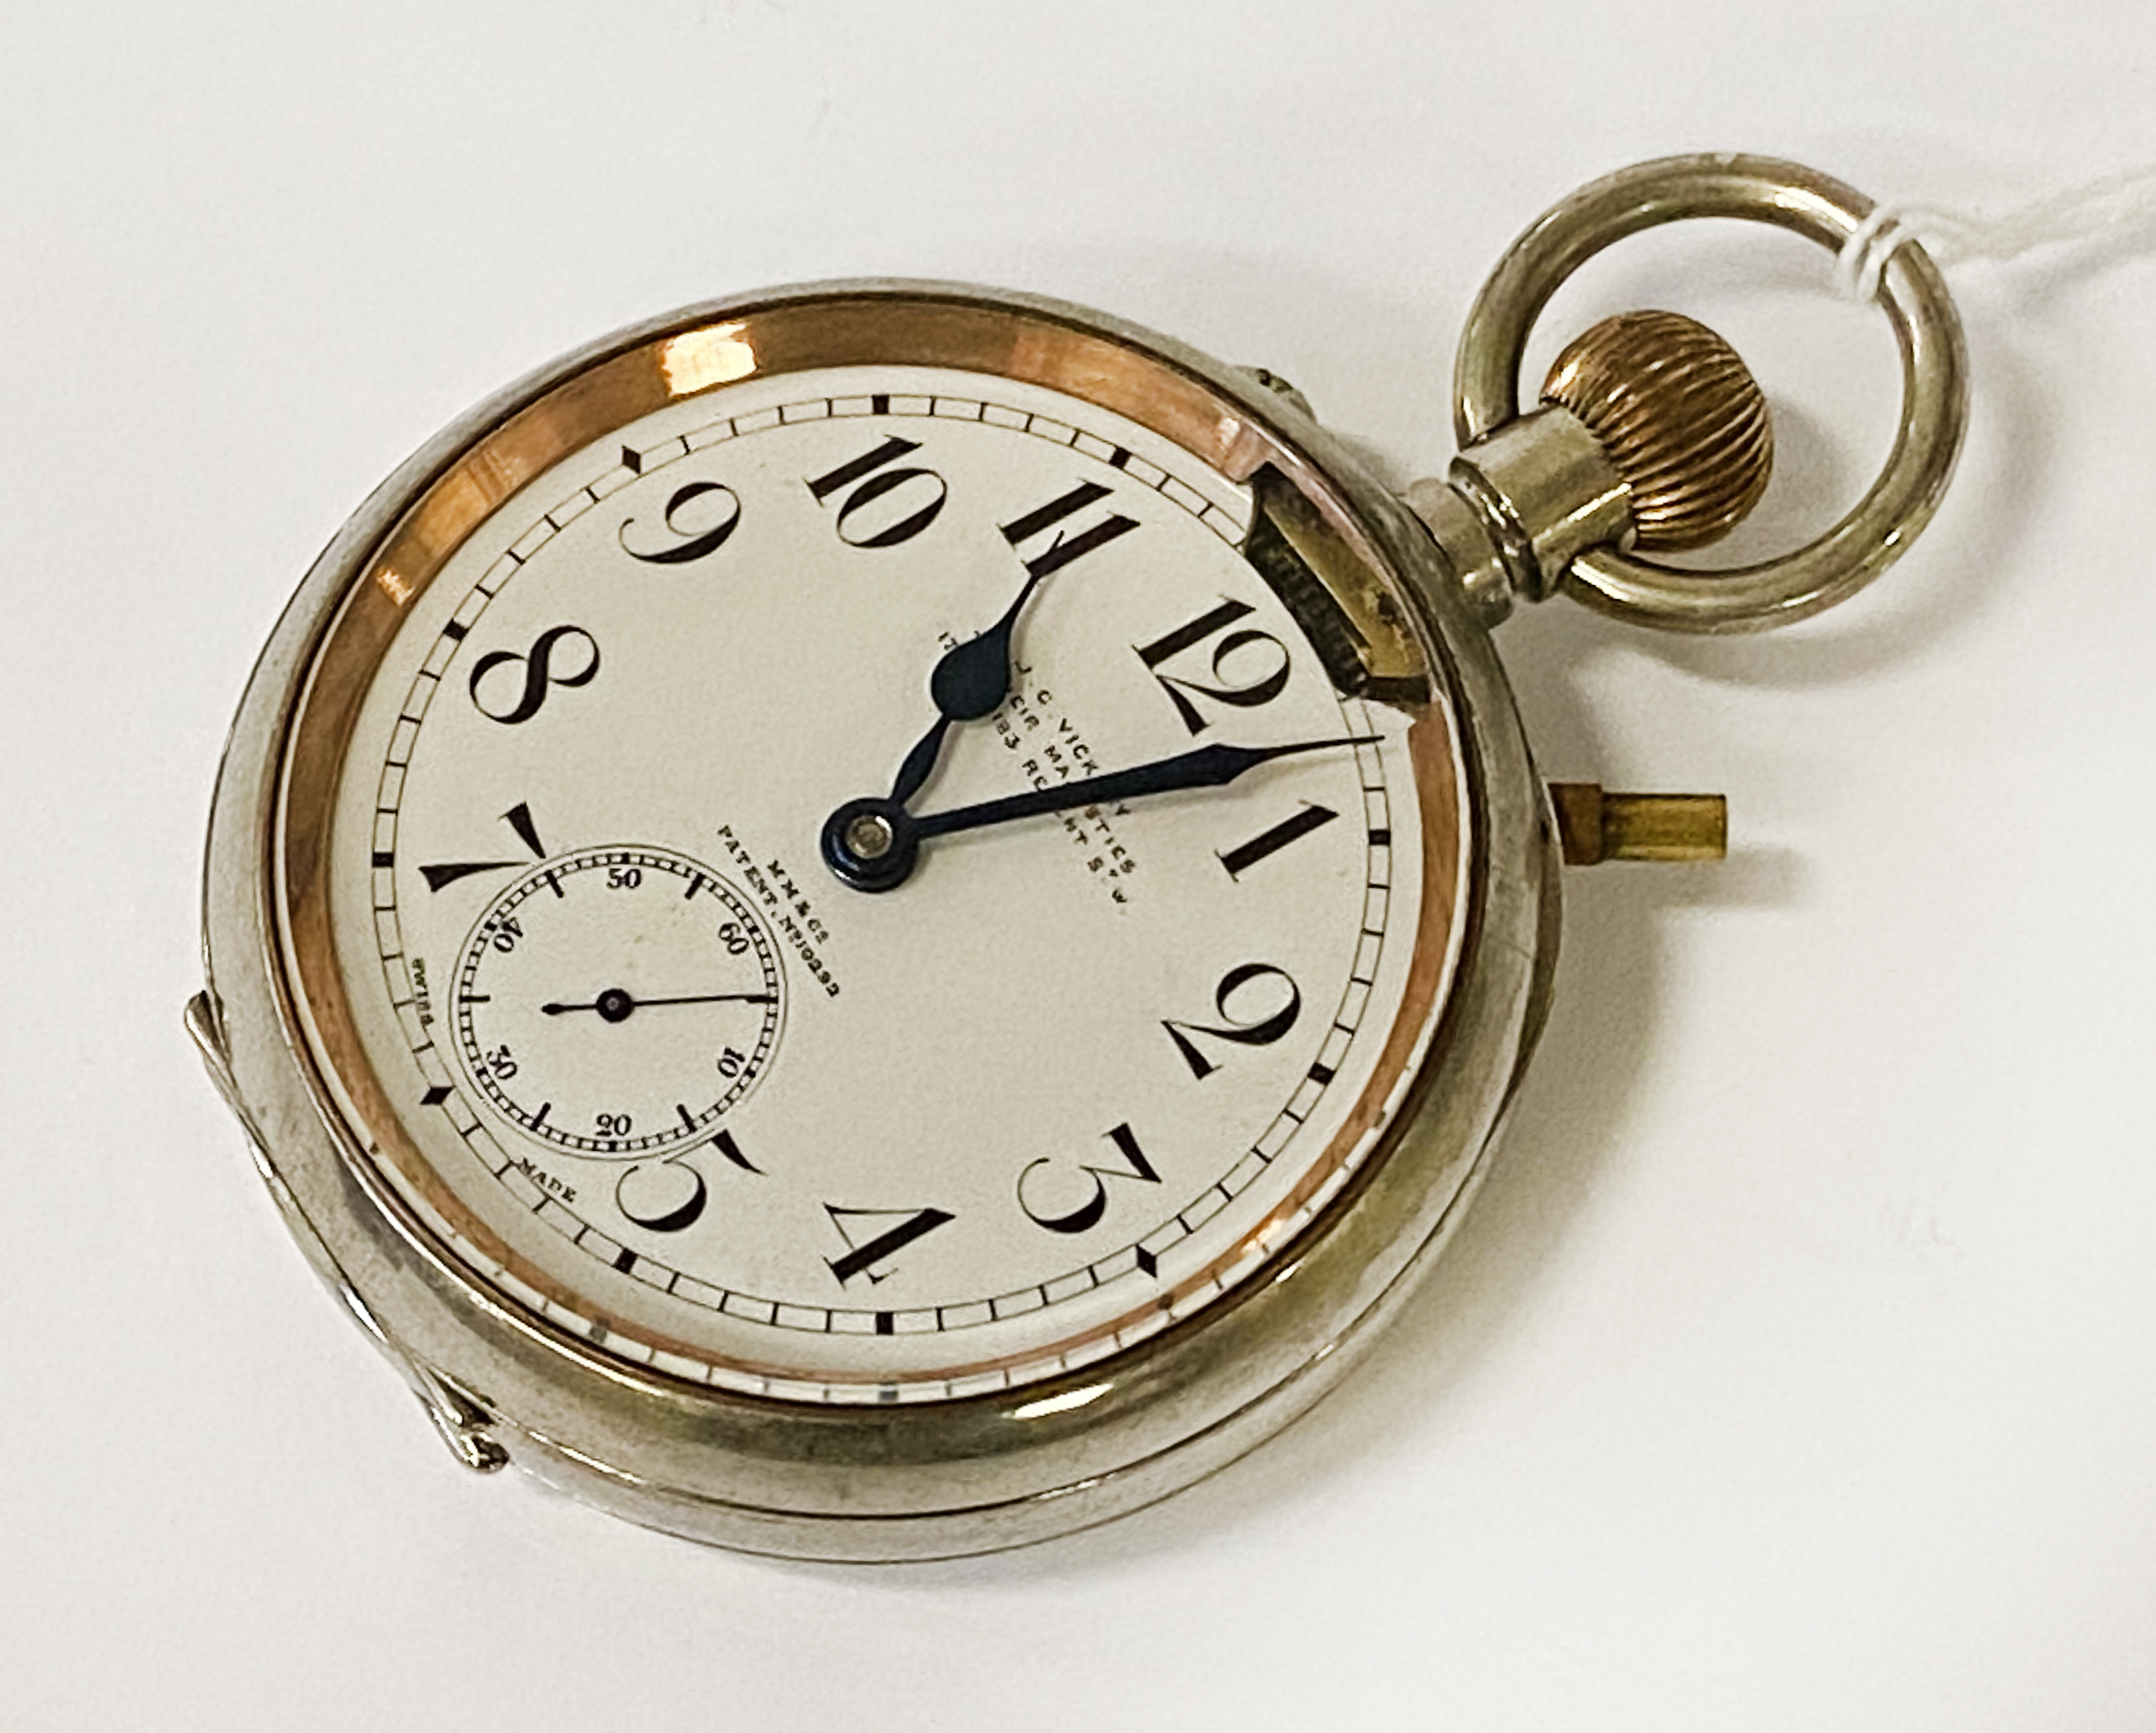 OPEN FACE LARGE GOLIATH POCKET WATCH BY J.C VICKERY PATENT NO 10292 - 6 CMS FACE APPROX